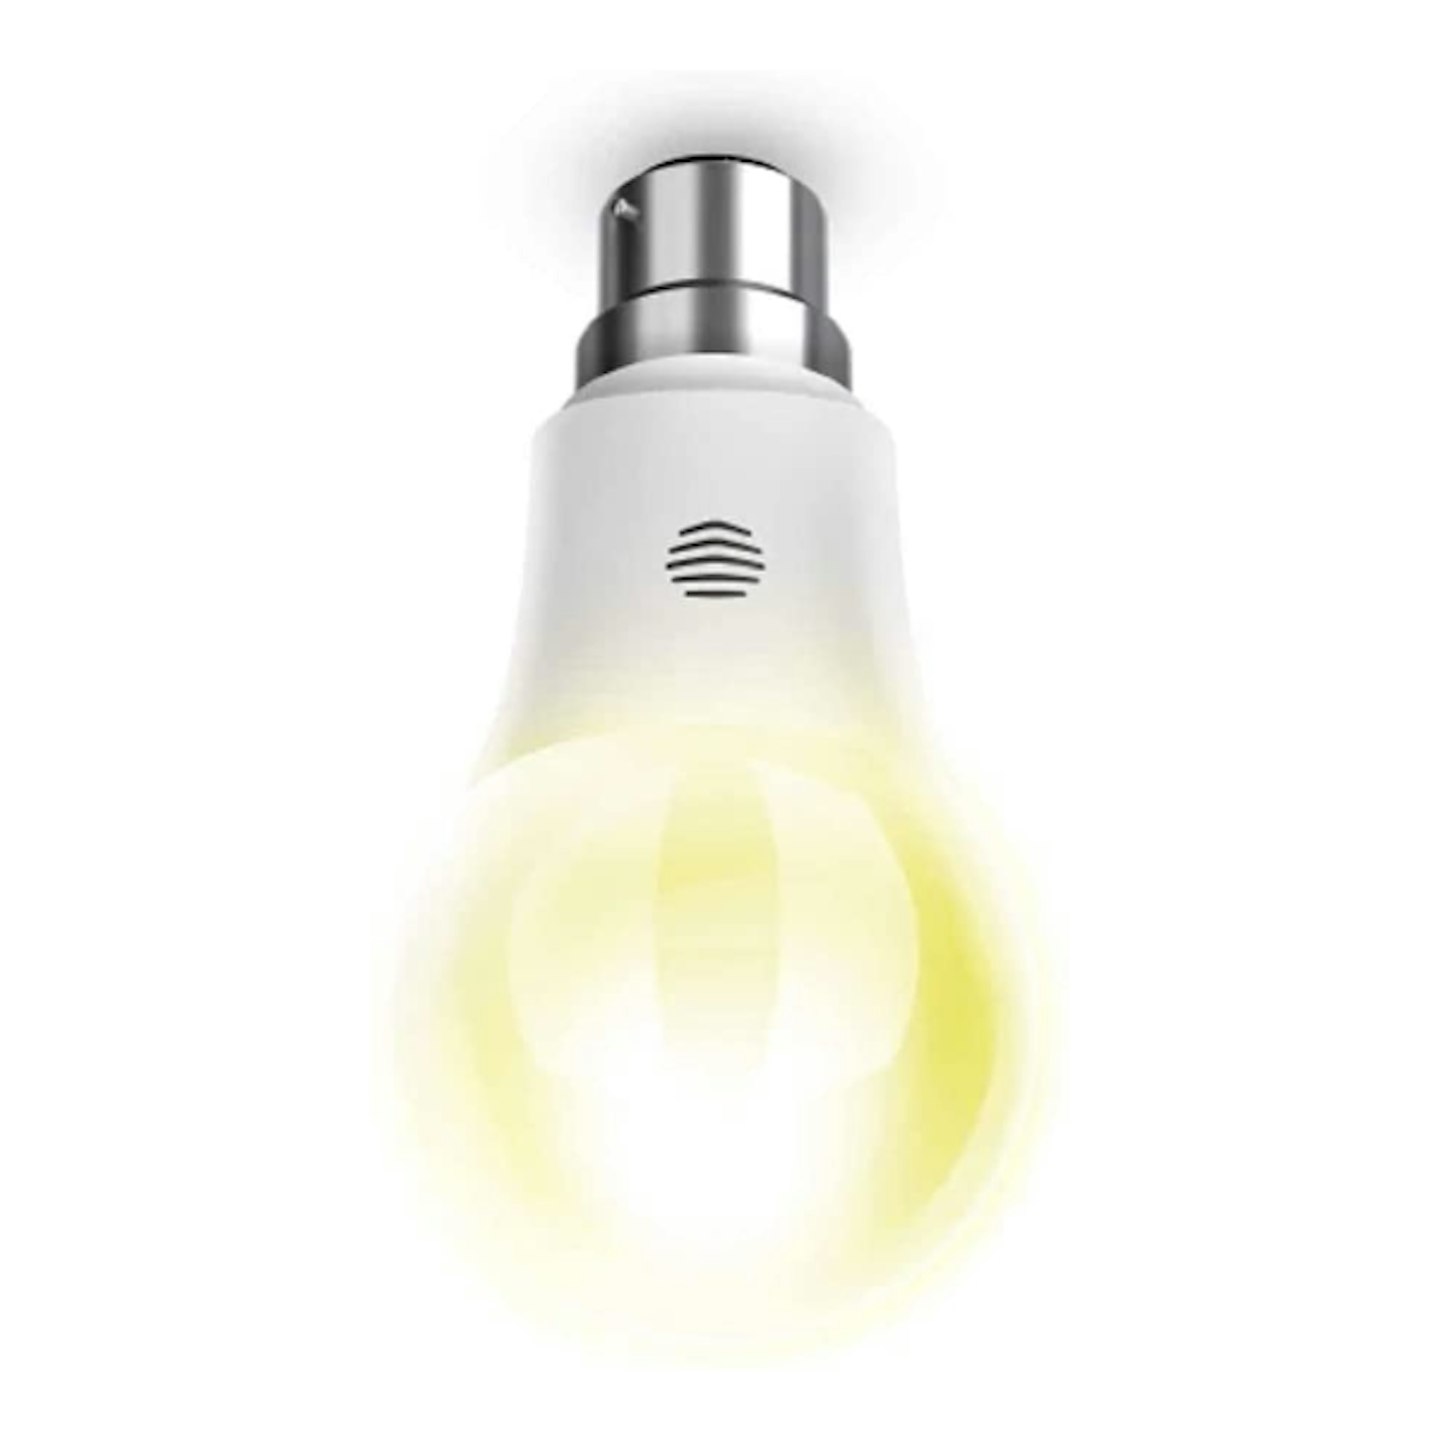 Hive Light Dimmable